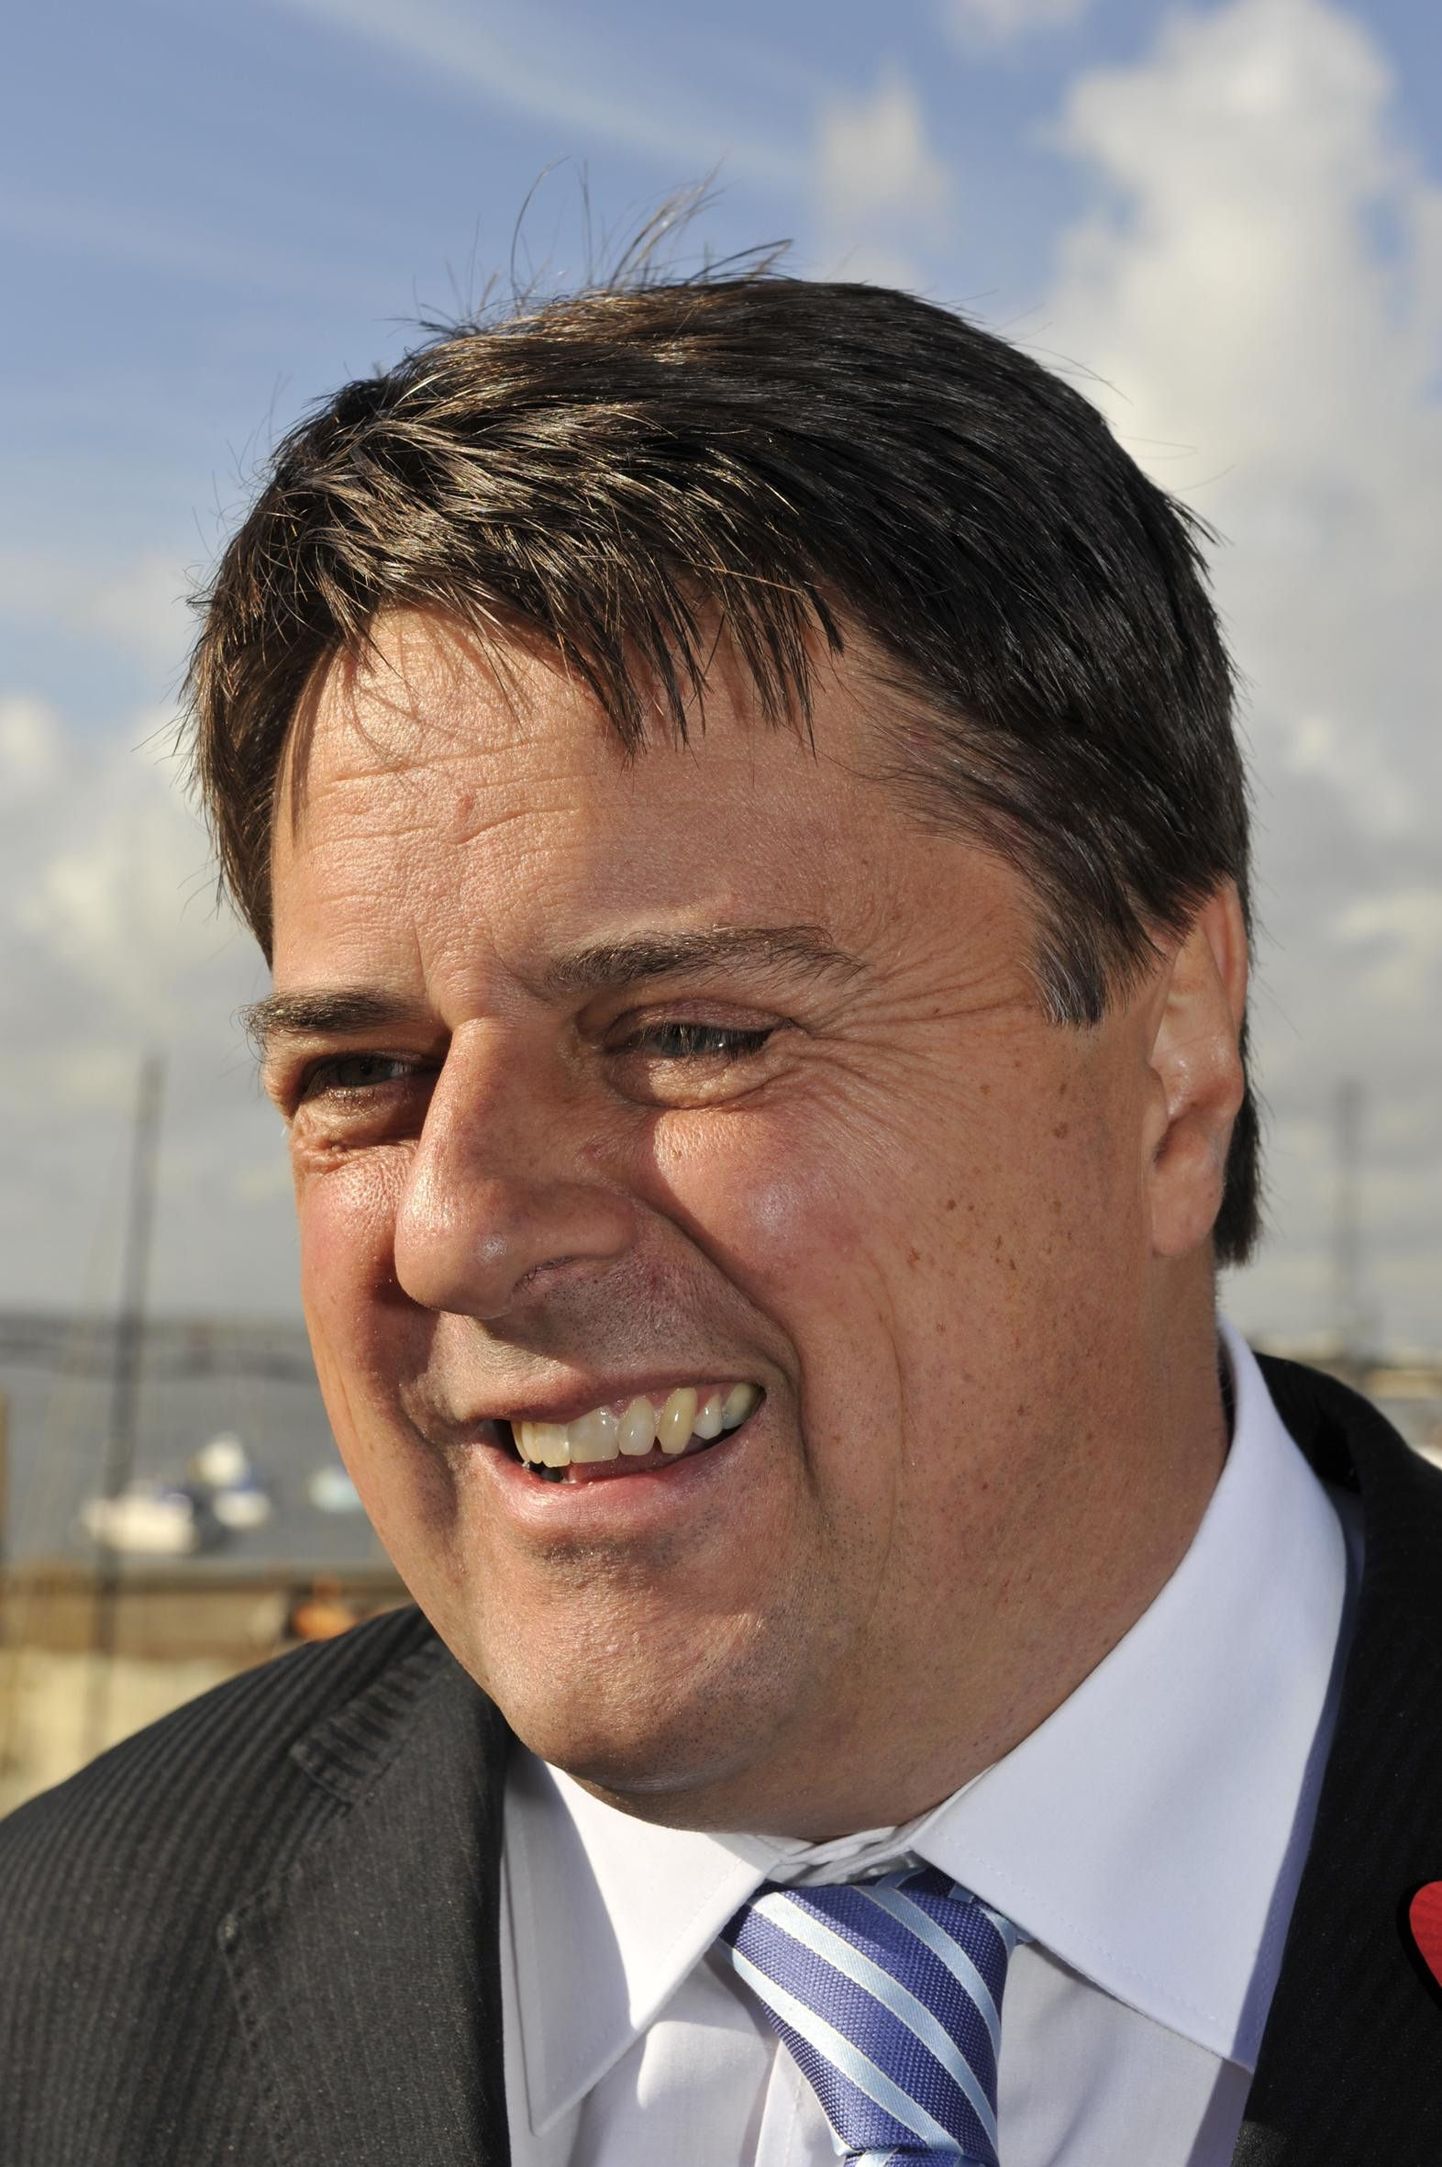 Nick Griffin, the leader of the British Nationalist Party talks to the media during a visit to Grays, Essex, following his appearance on BBC Question Time last night.